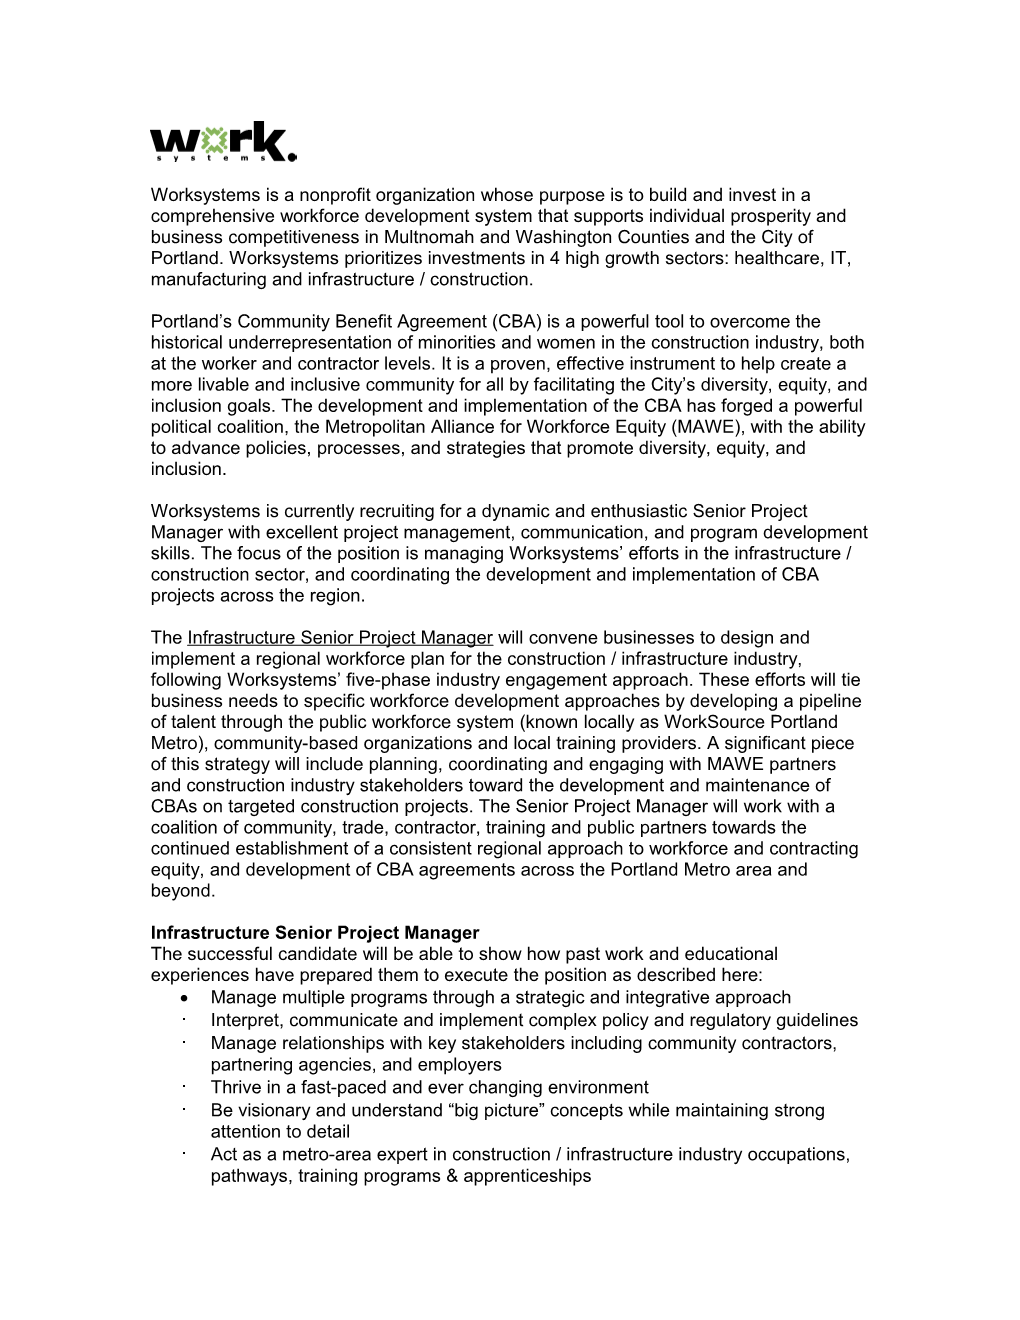 The Position of Senior Project Manager Is Within Worksystems, Inc